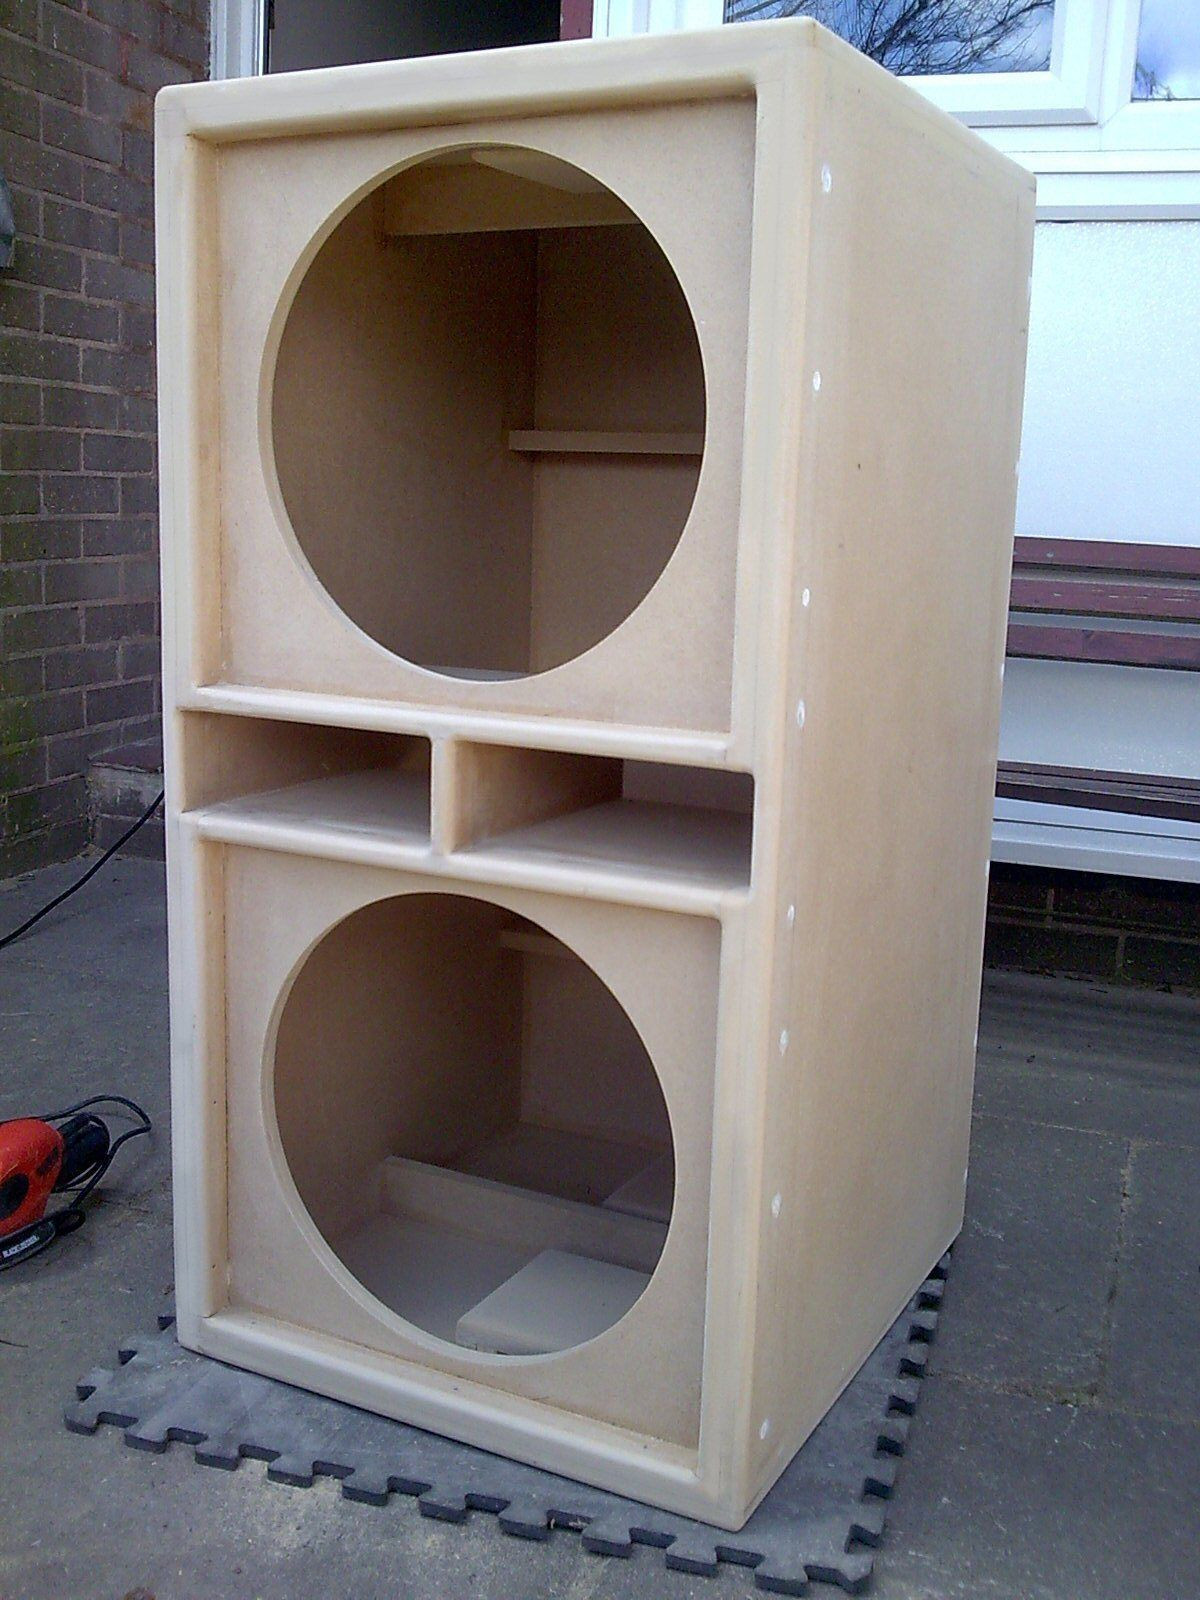 DIY Subwoofer Boxes
 Pin by Benjamin Ortizrivera on sound system